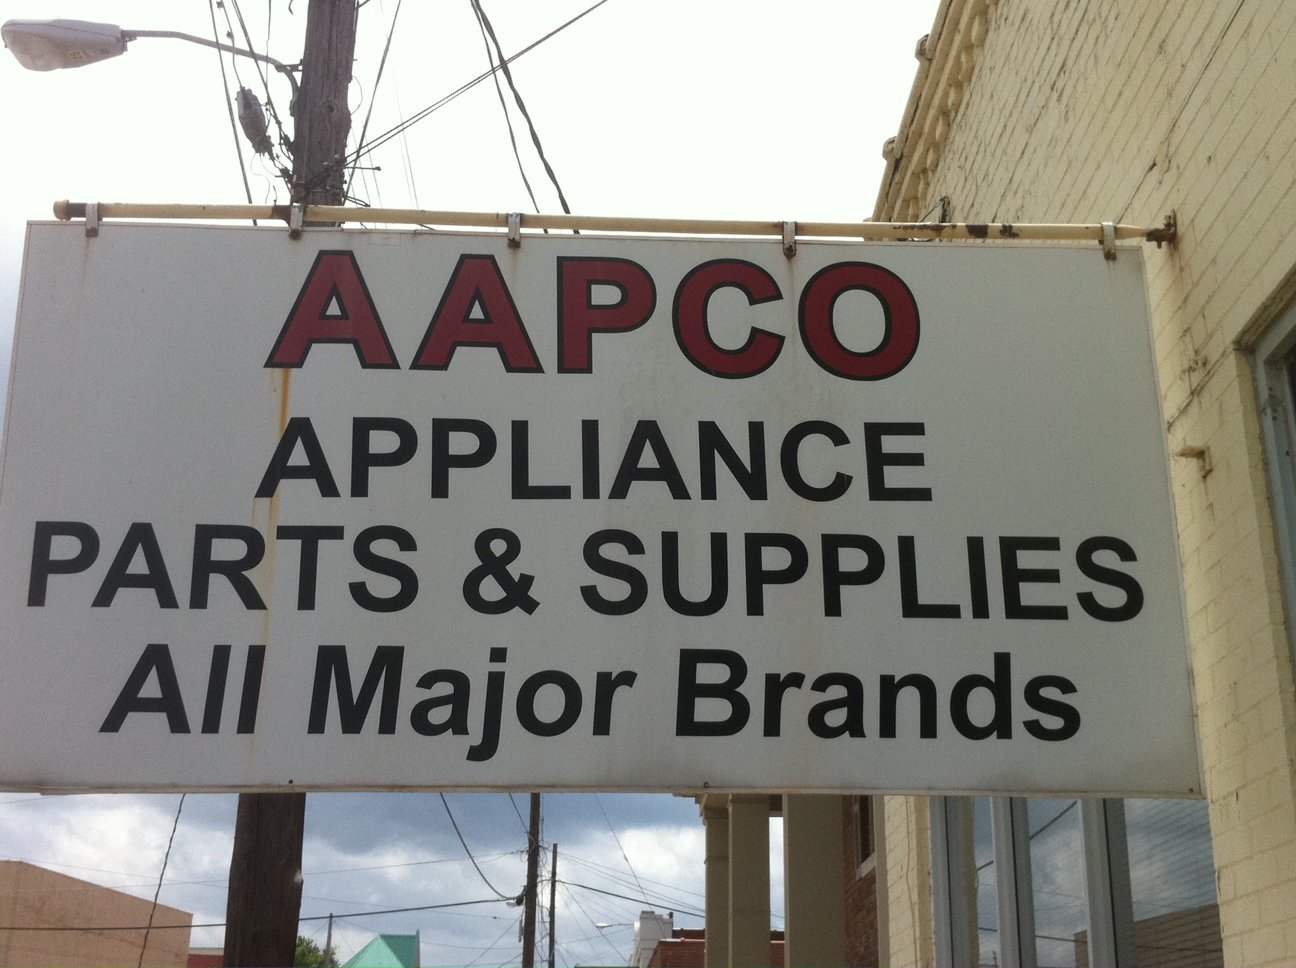 Aapco Sign